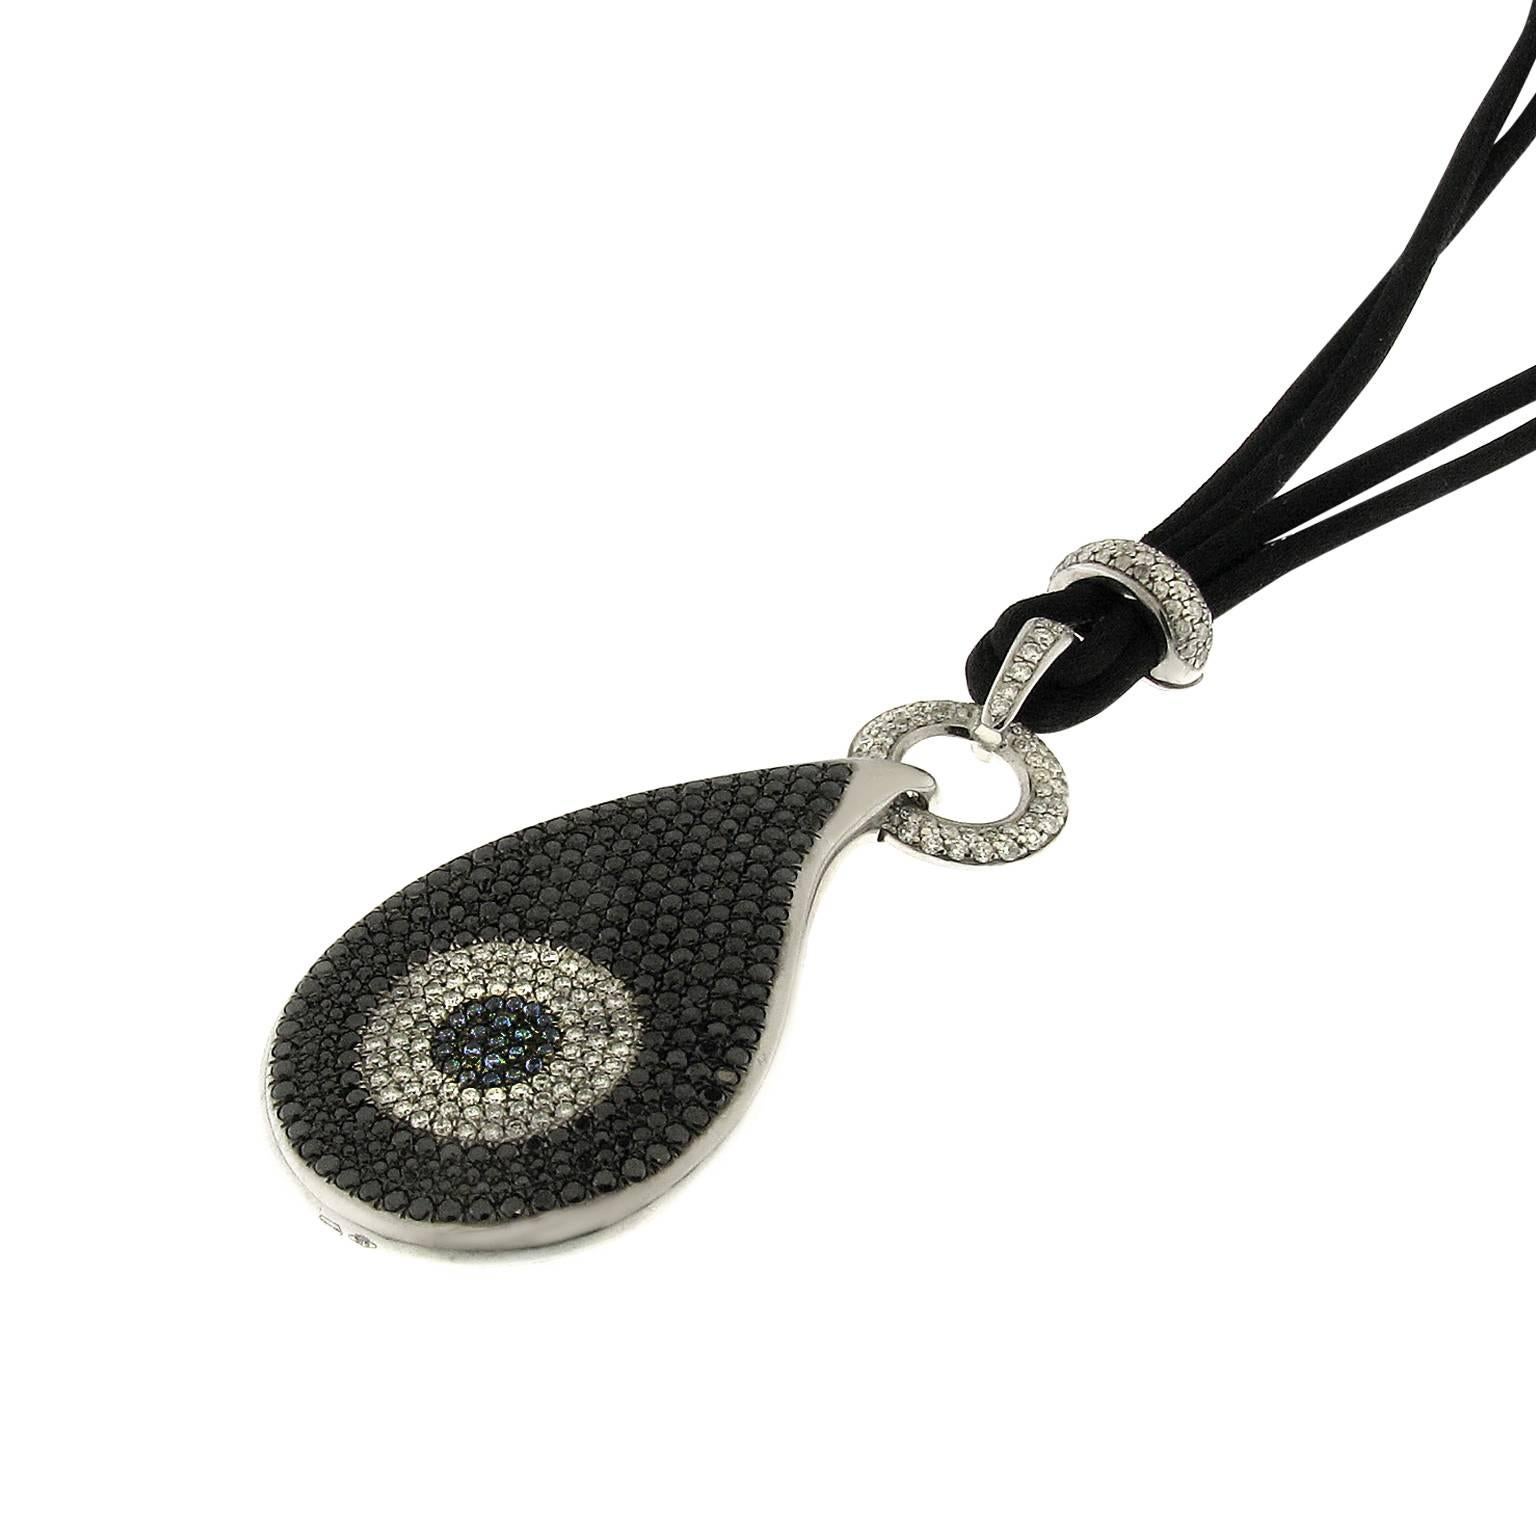 Timeless contemporary evil-eye sculptured pendant in 18k white gold. The jewel features a black and white diamond and tanzanite pavé setting. Total diamond weight is 6.16ct. The pendant is mounted on black silk cord and lined with onyx